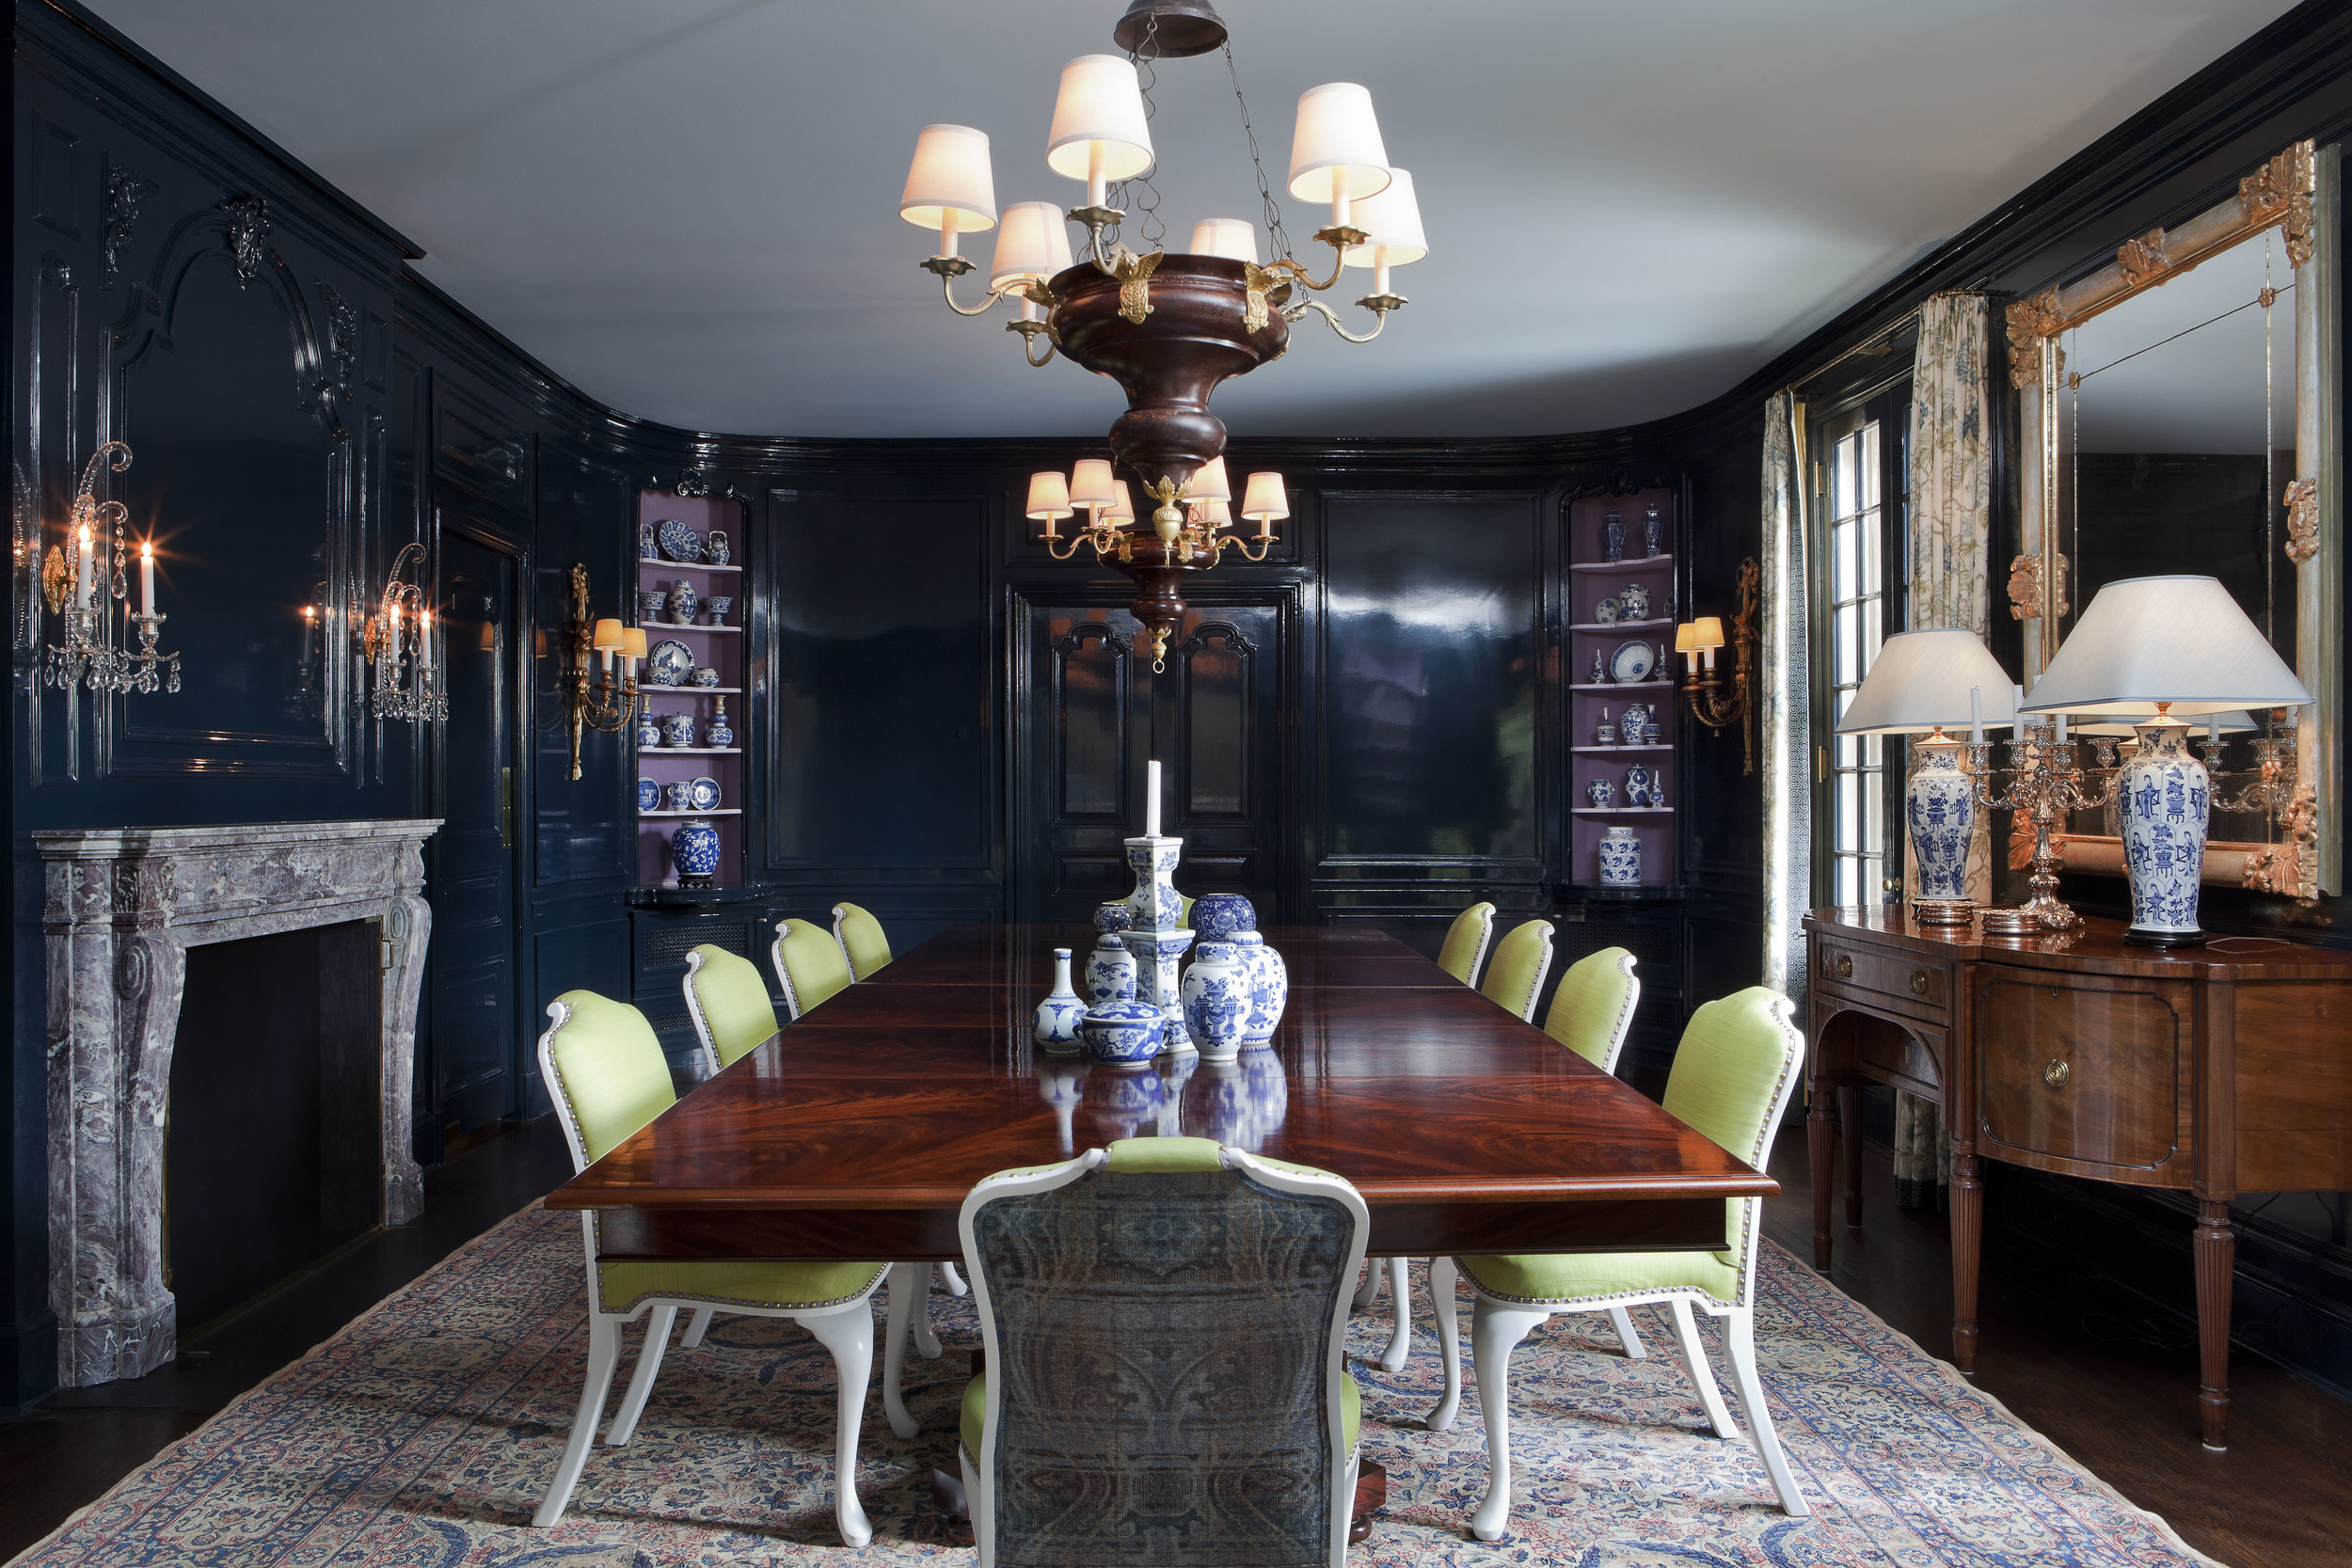  Highlighting the wife’s collection of blue-and-white porcelain was a priority in the dining room. The room’s walls are coated in a deep indigo lacquer, and the corner niches are lined in lilac burlap. To give the space versatility, Isbell designed t